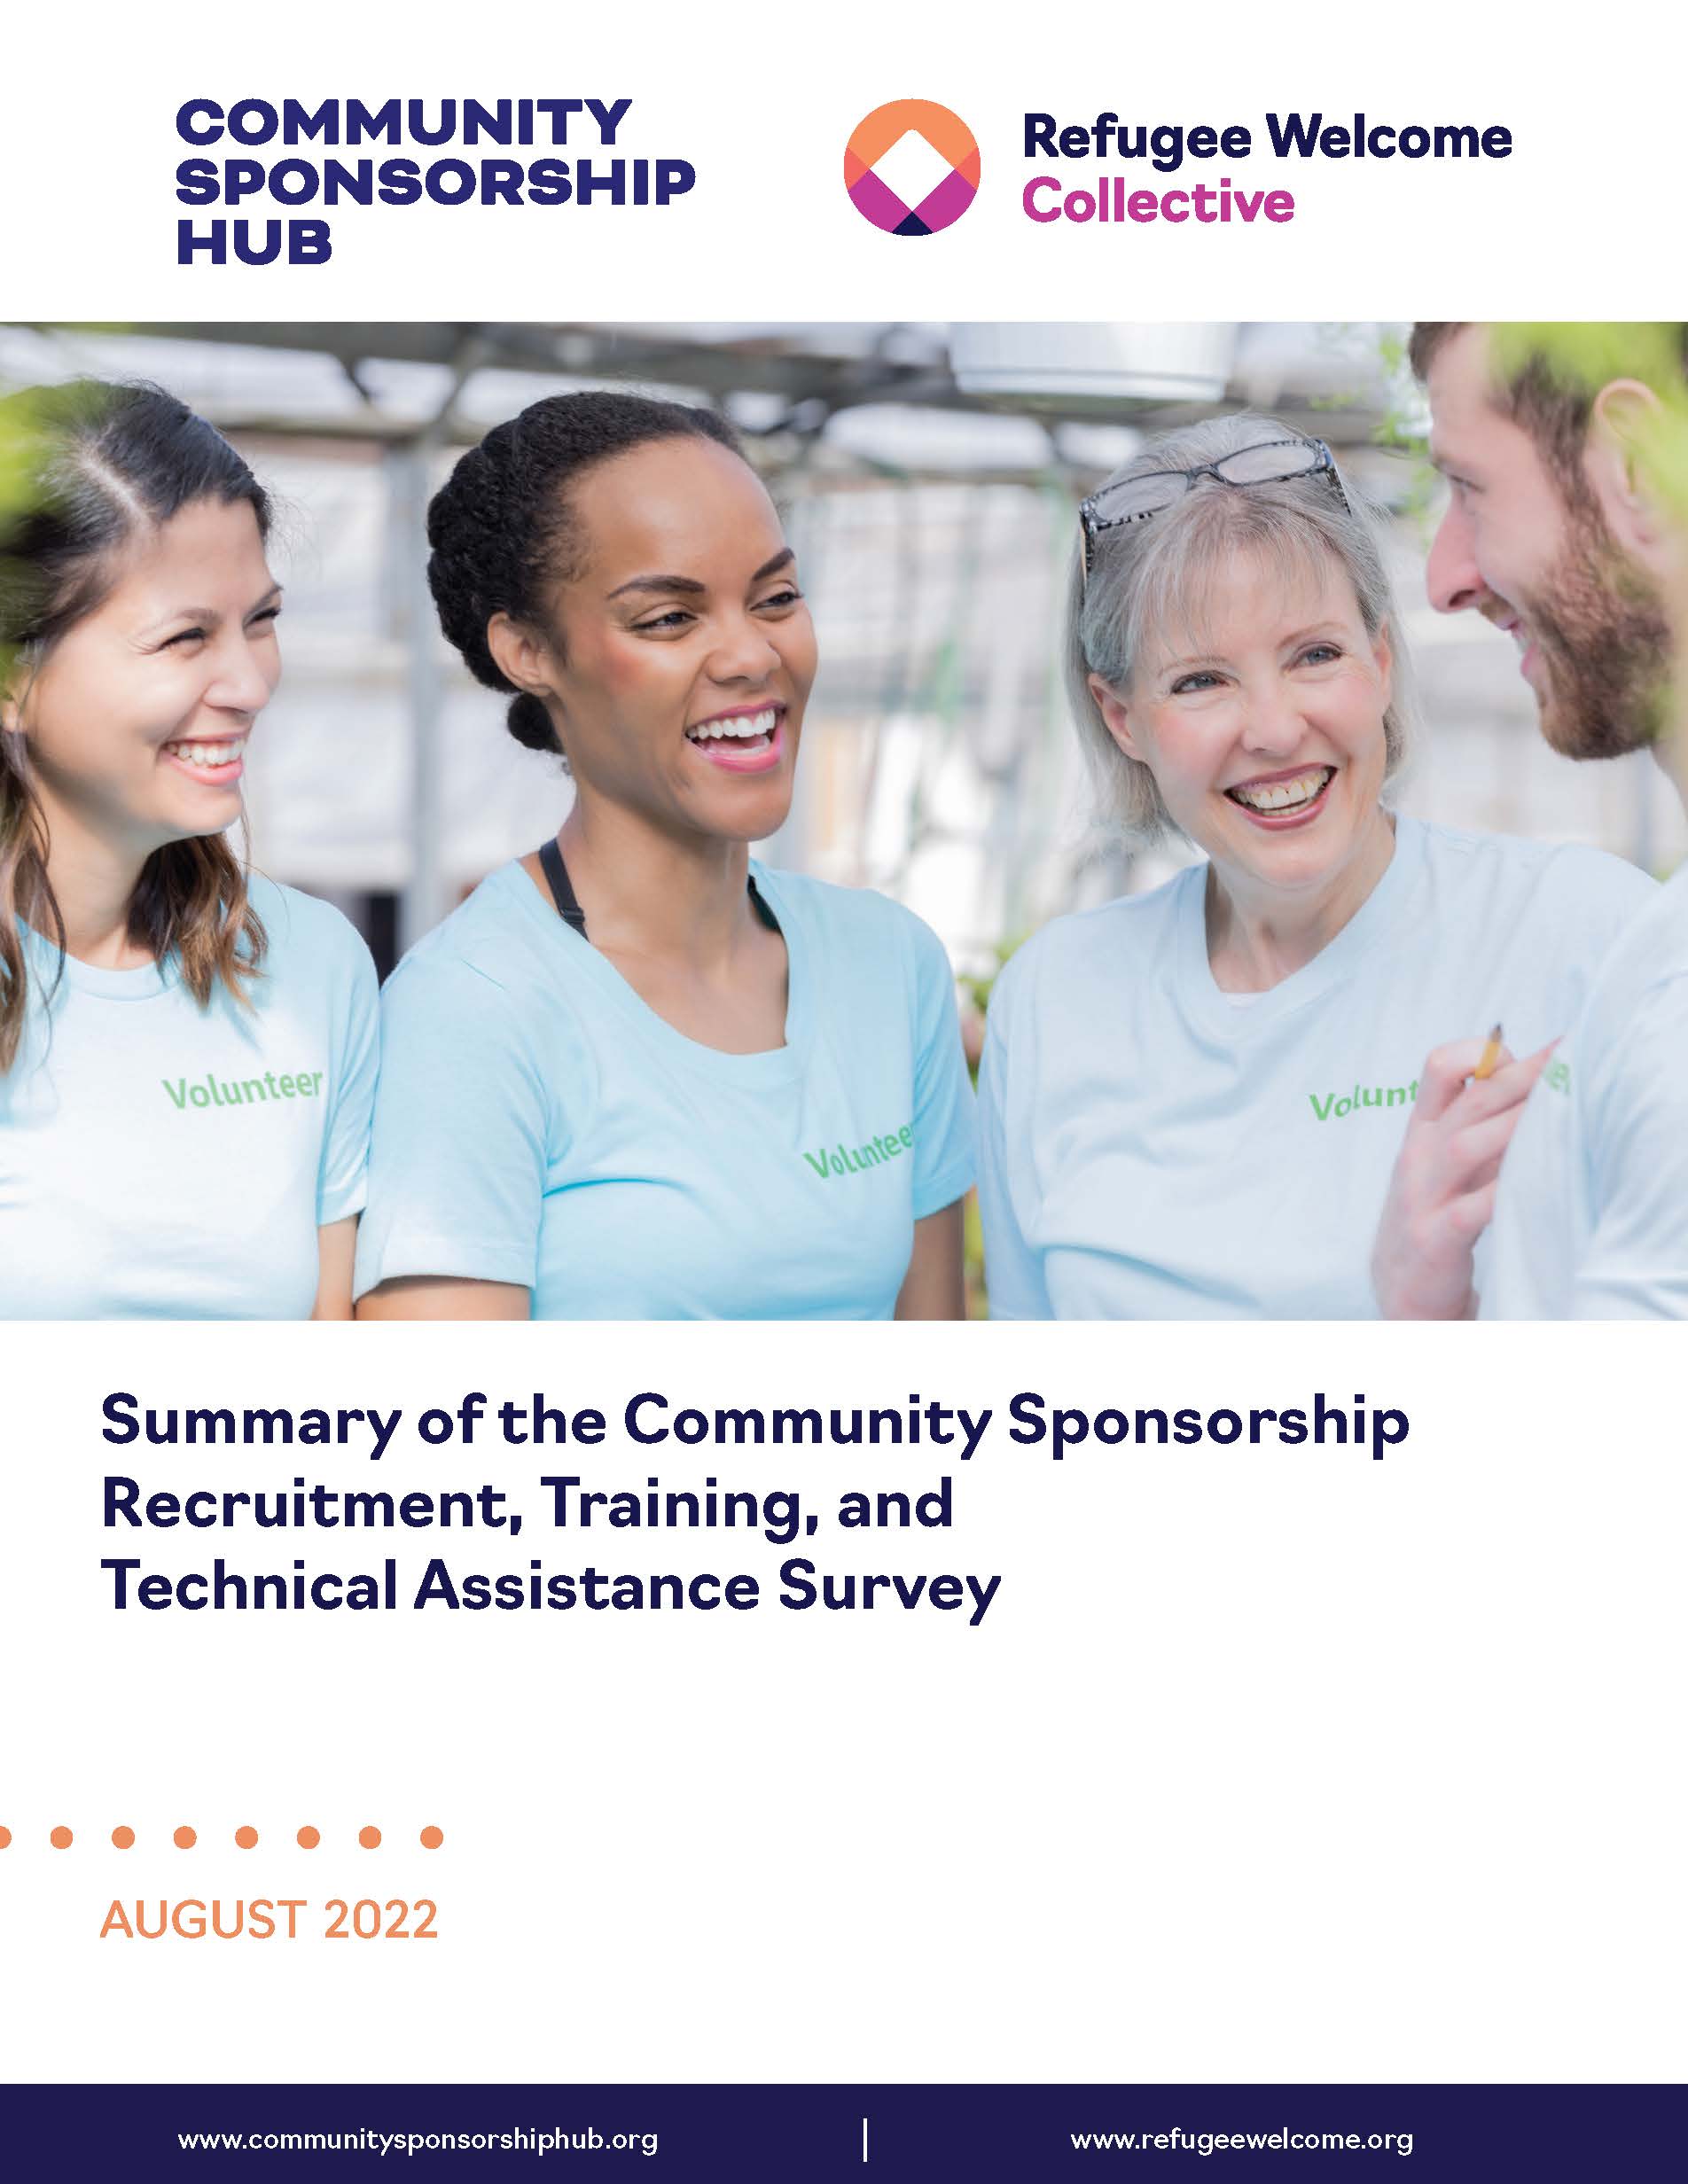 Summary of the Community Sponsorship Recruitment, Training, and Technical Assistance Survey